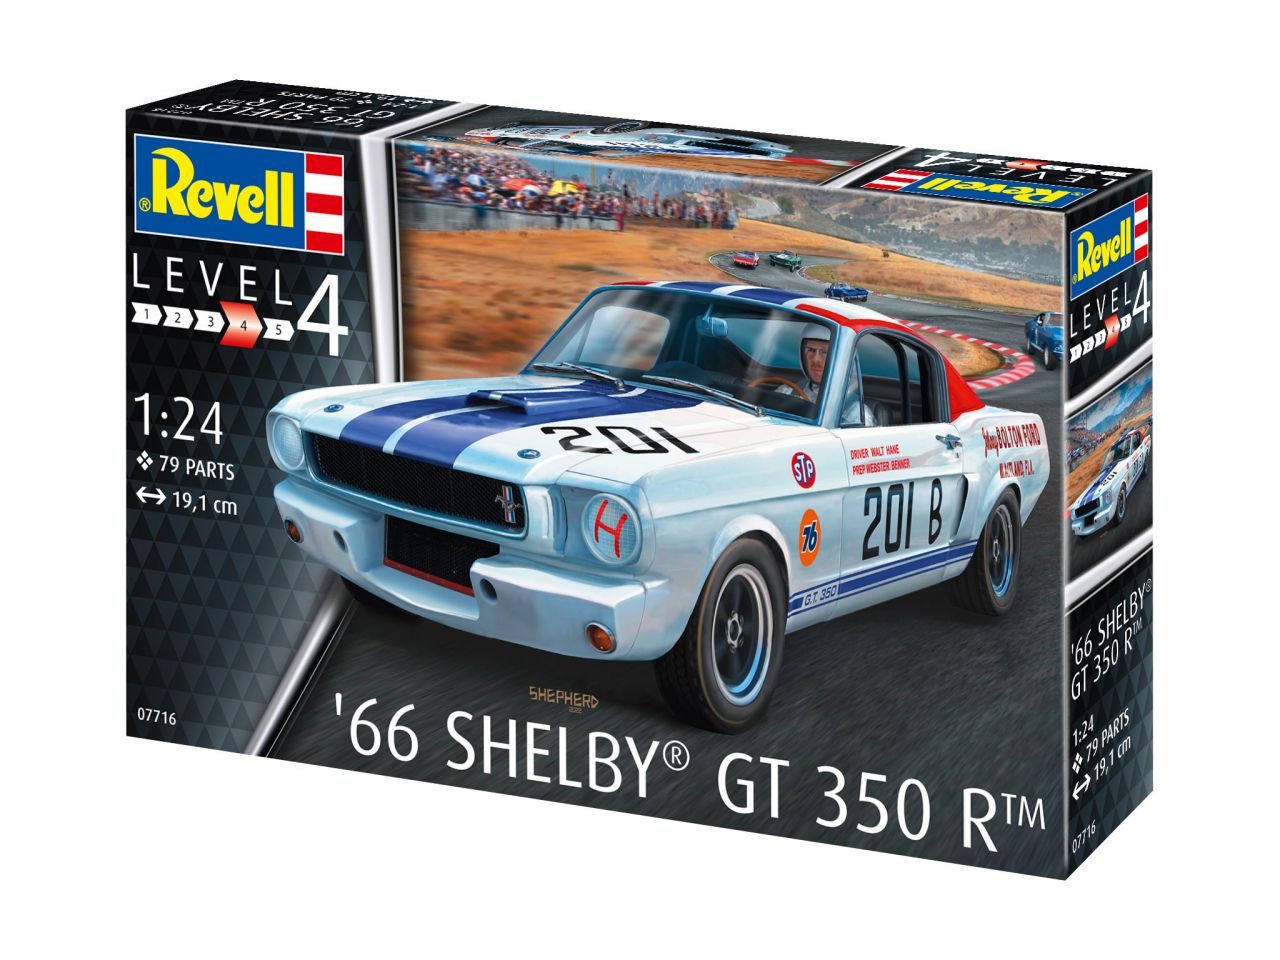 Revell 7716 1966 Shelby GT 350 R